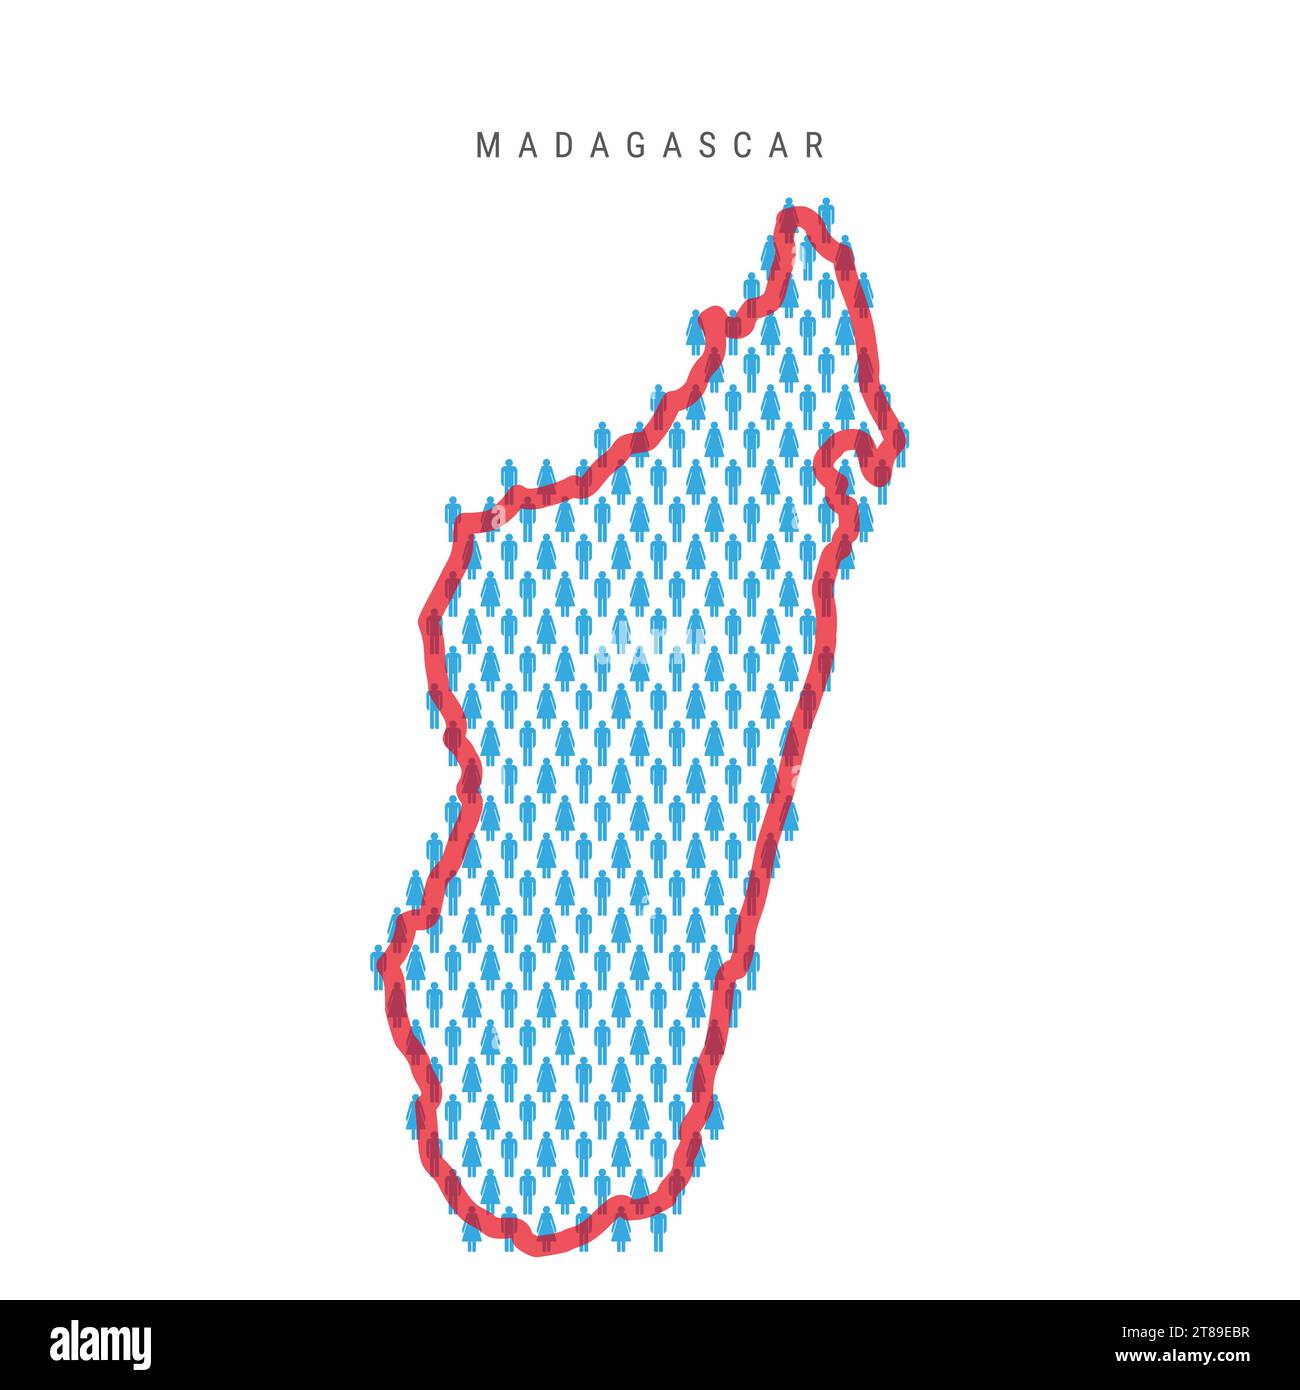 Madagascar population map. Stick figures Republic of Madagascar people map with bold red translucent country border. Pattern of men and women icons. I Stock Vector